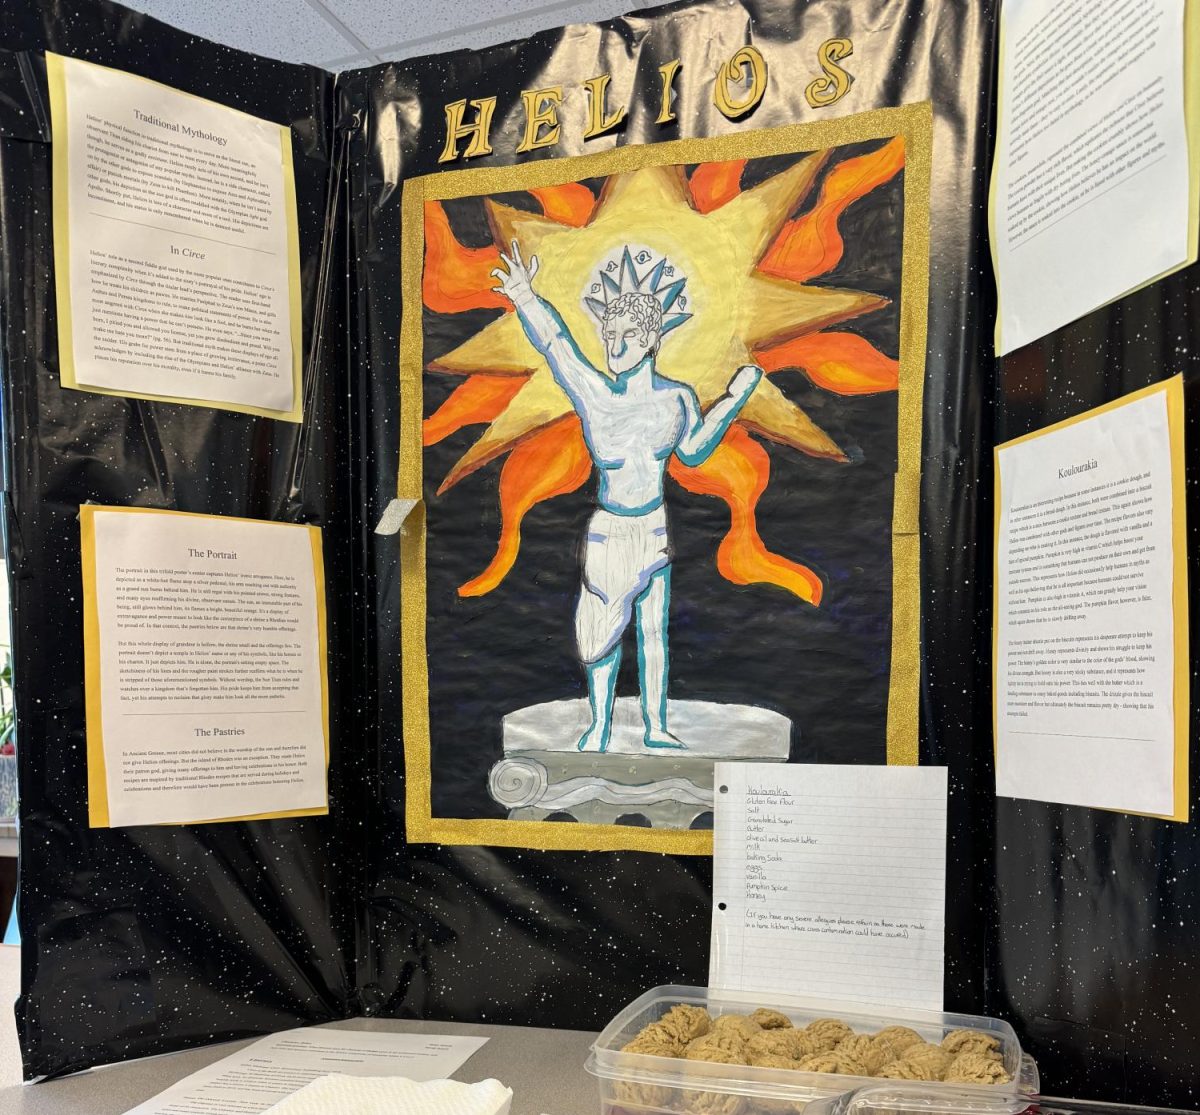 Project of Helios on display in the library